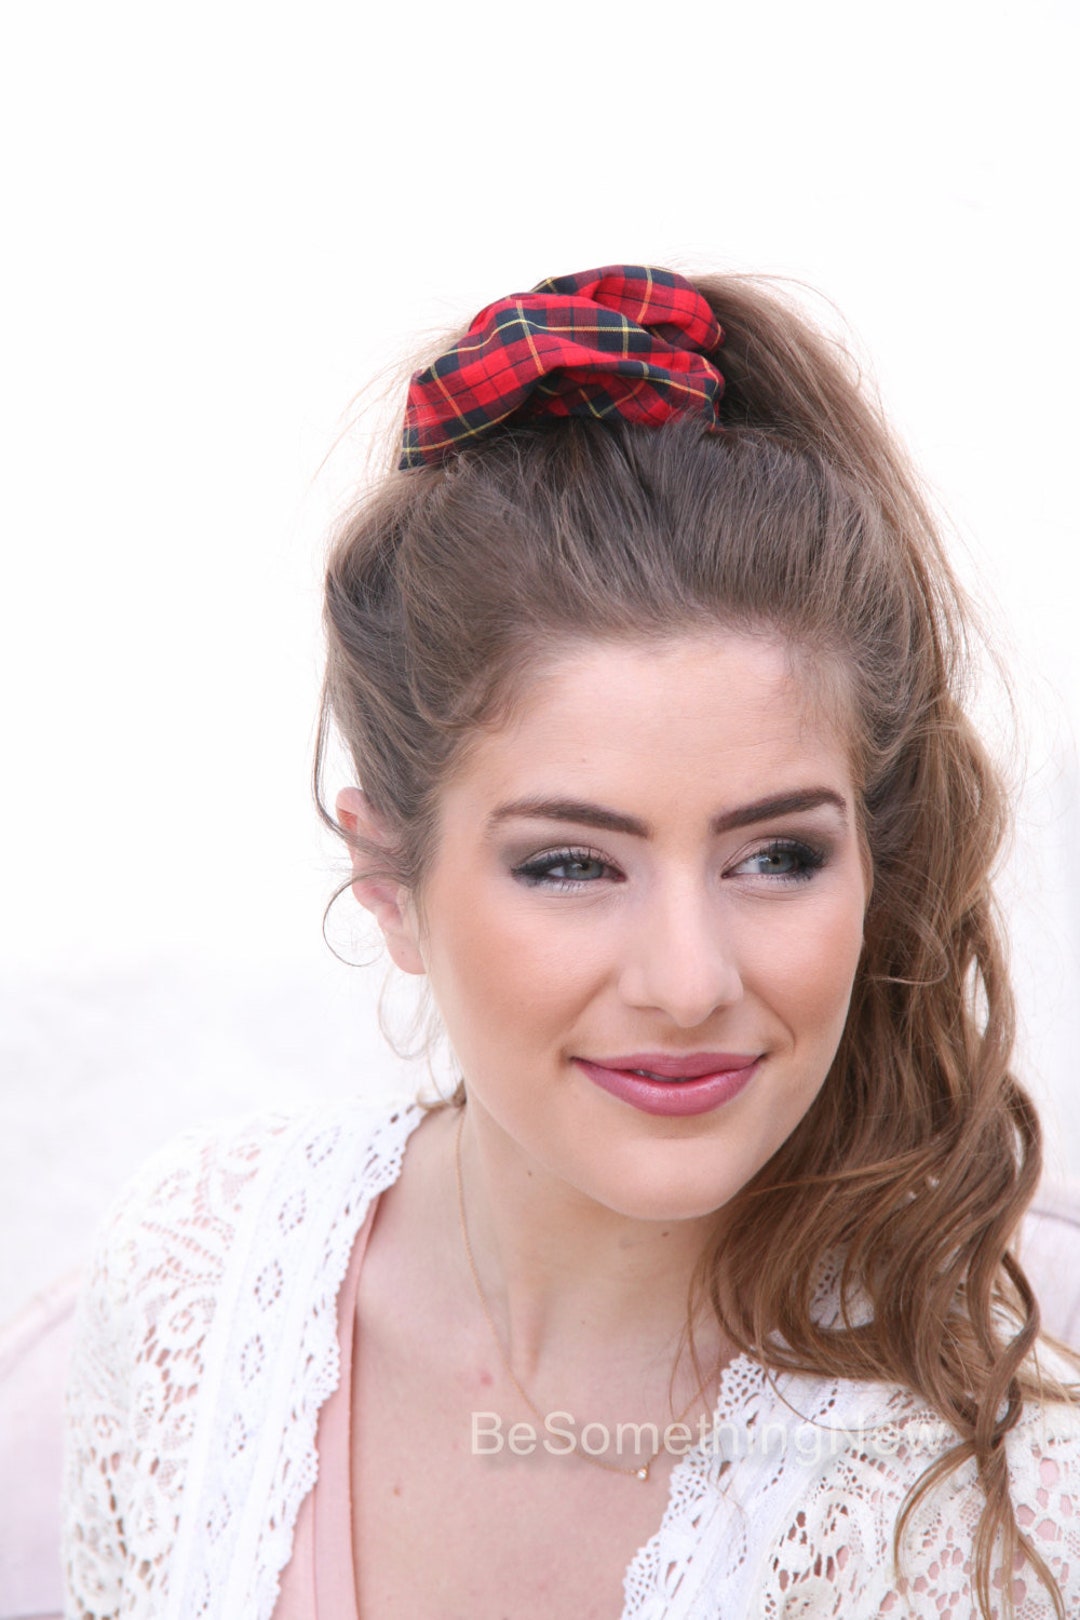 Oversize Scrunchie Hair Cloud in Vintage Red and Black Plaid - Etsy